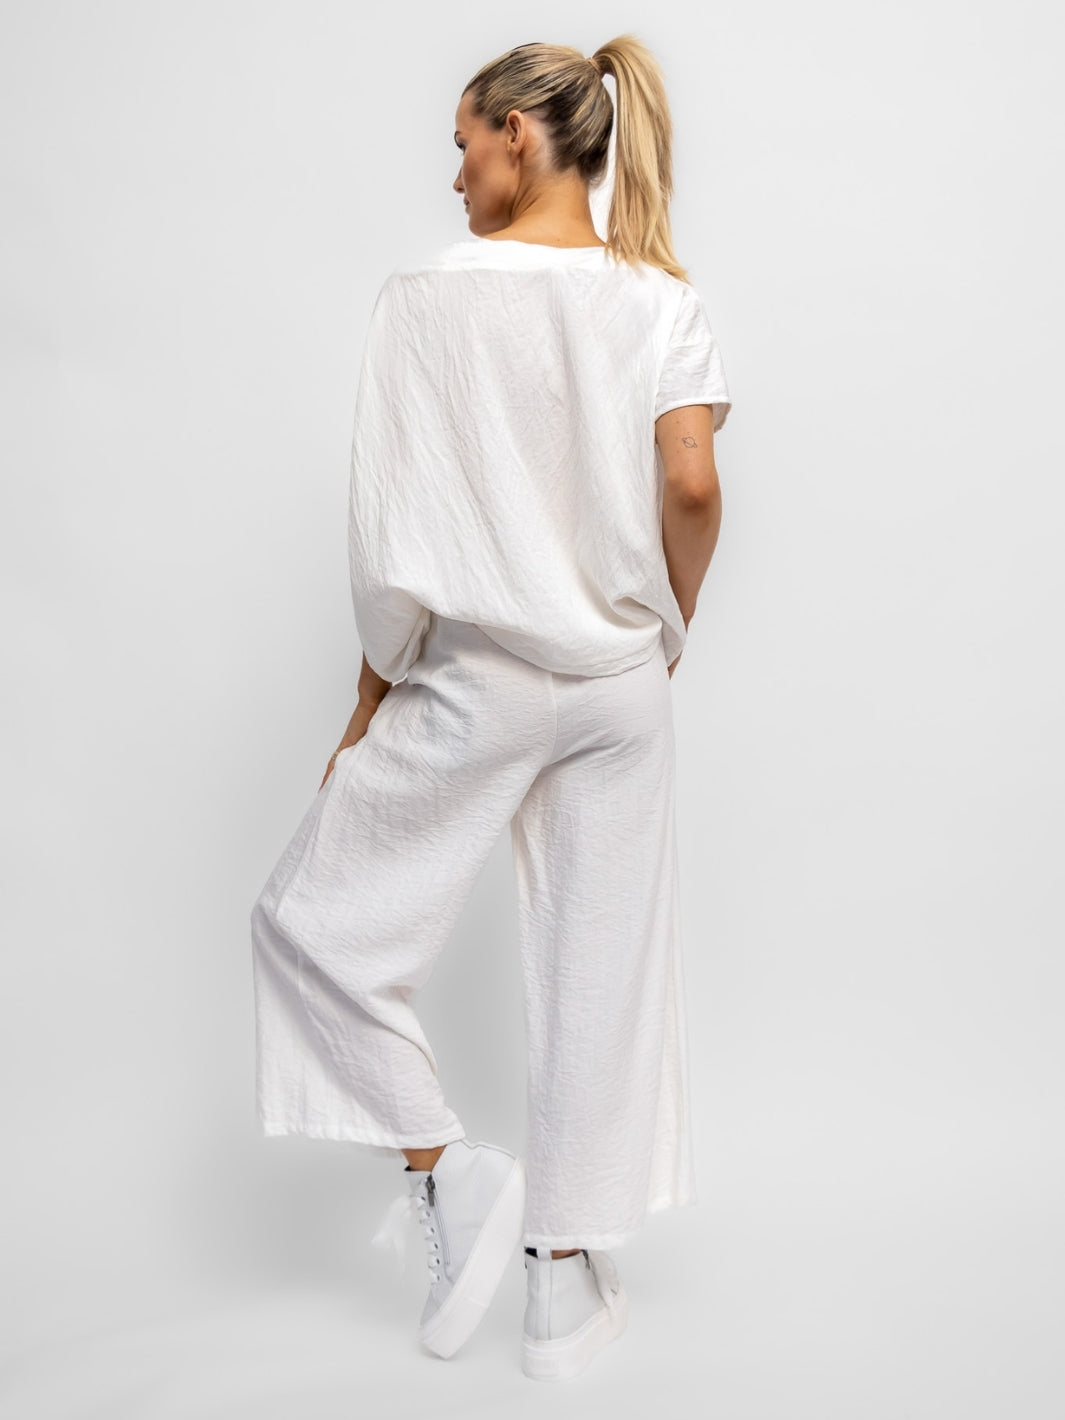 Xenia Design Trousers Xenia TUHO Trousers in Soft White